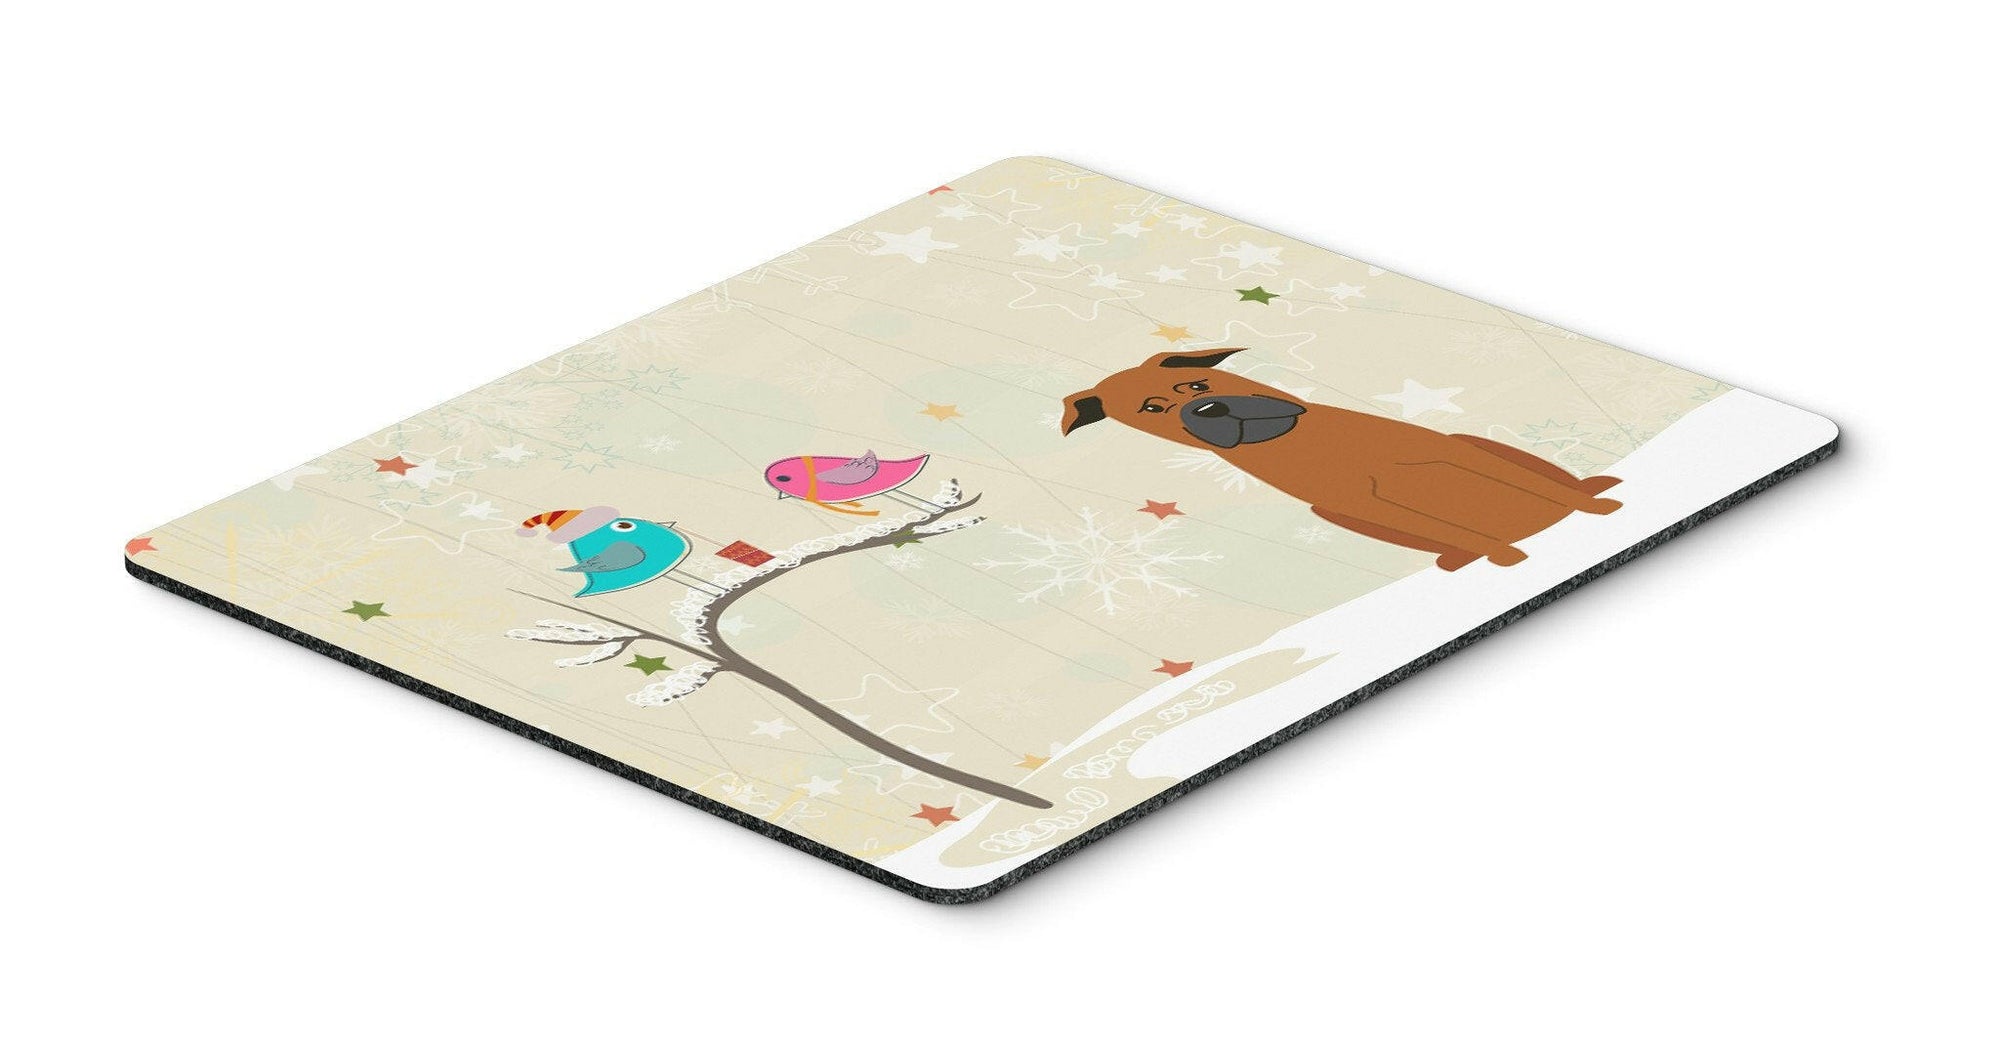 Christmas Presents between Friends Chinese Chongqing Dog Mouse Pad, Hot Pad or Trivet BB2583MP by Caroline's Treasures